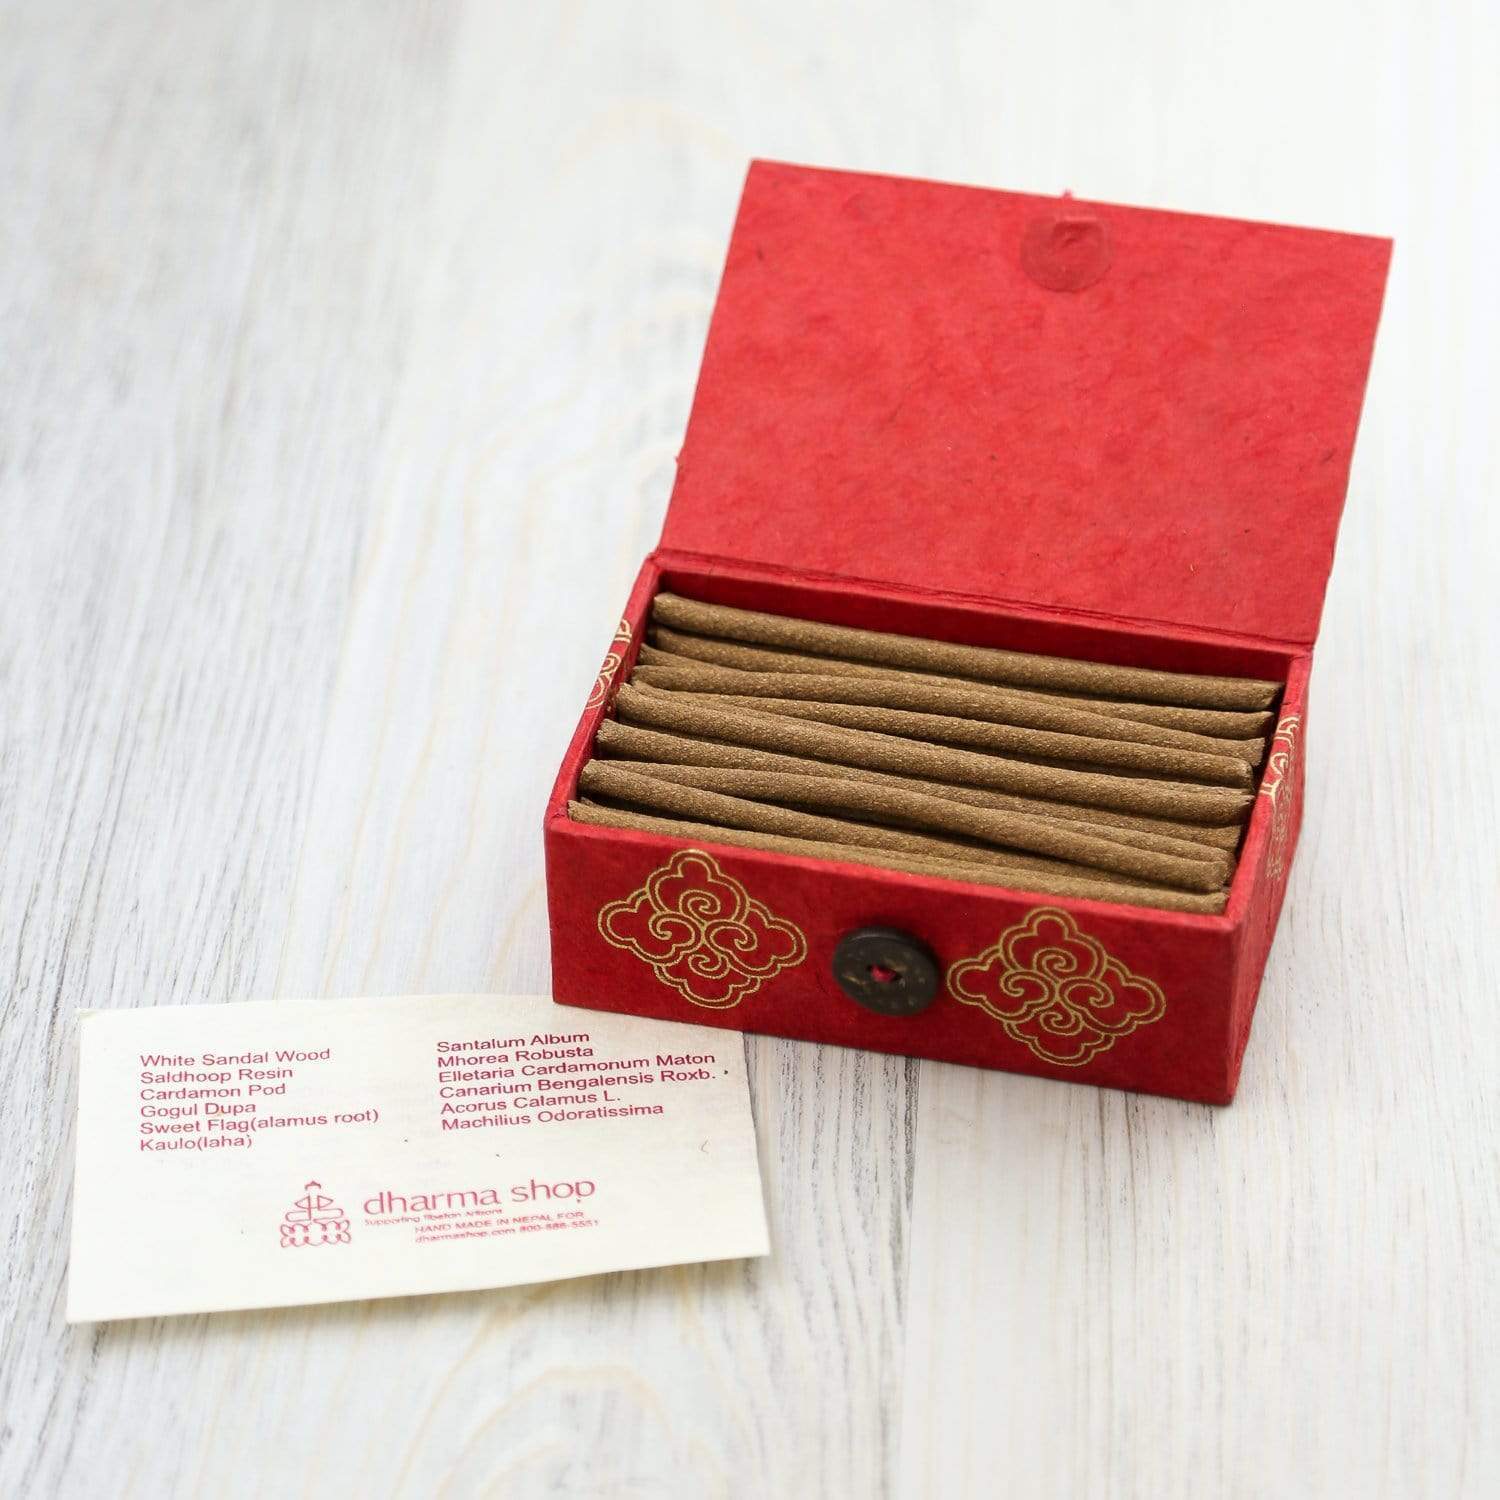 Dragon's Blood Protection Incense